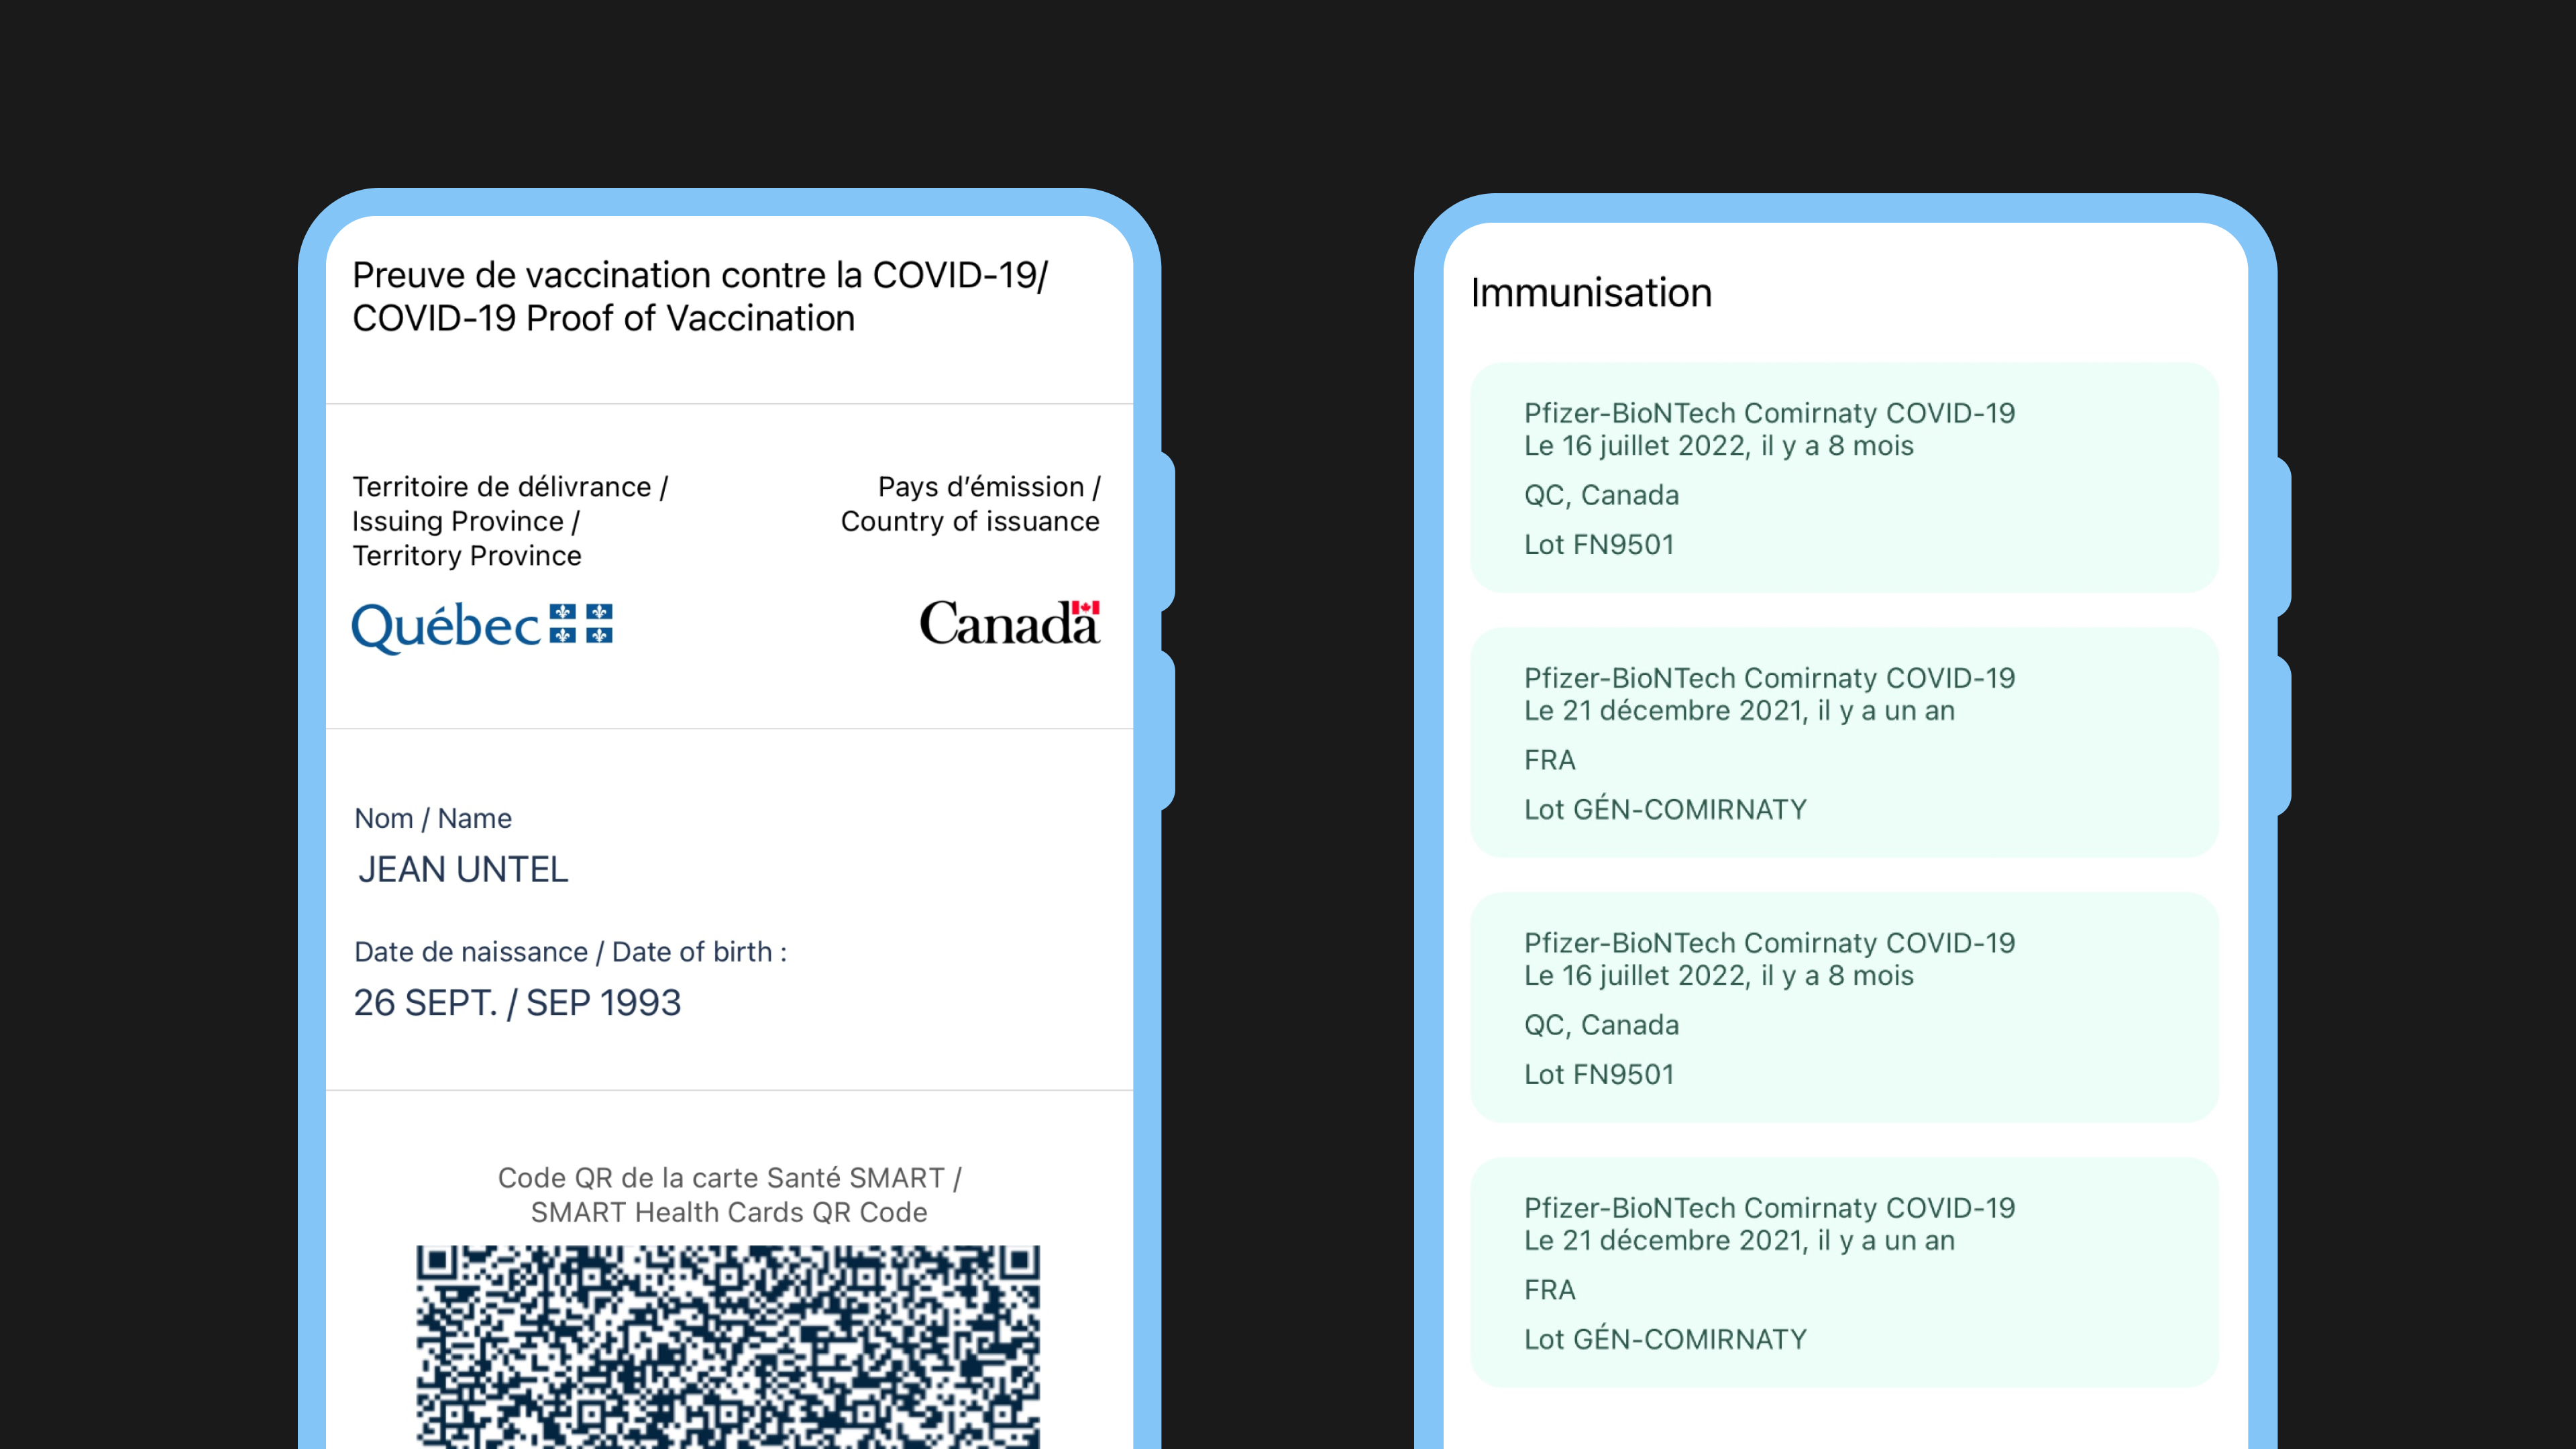 Two mobile devices showing the Canadian COVID-19 Proof of vaccination Travel document (left) and the COVID-19 immunization record stored on the proof (right).